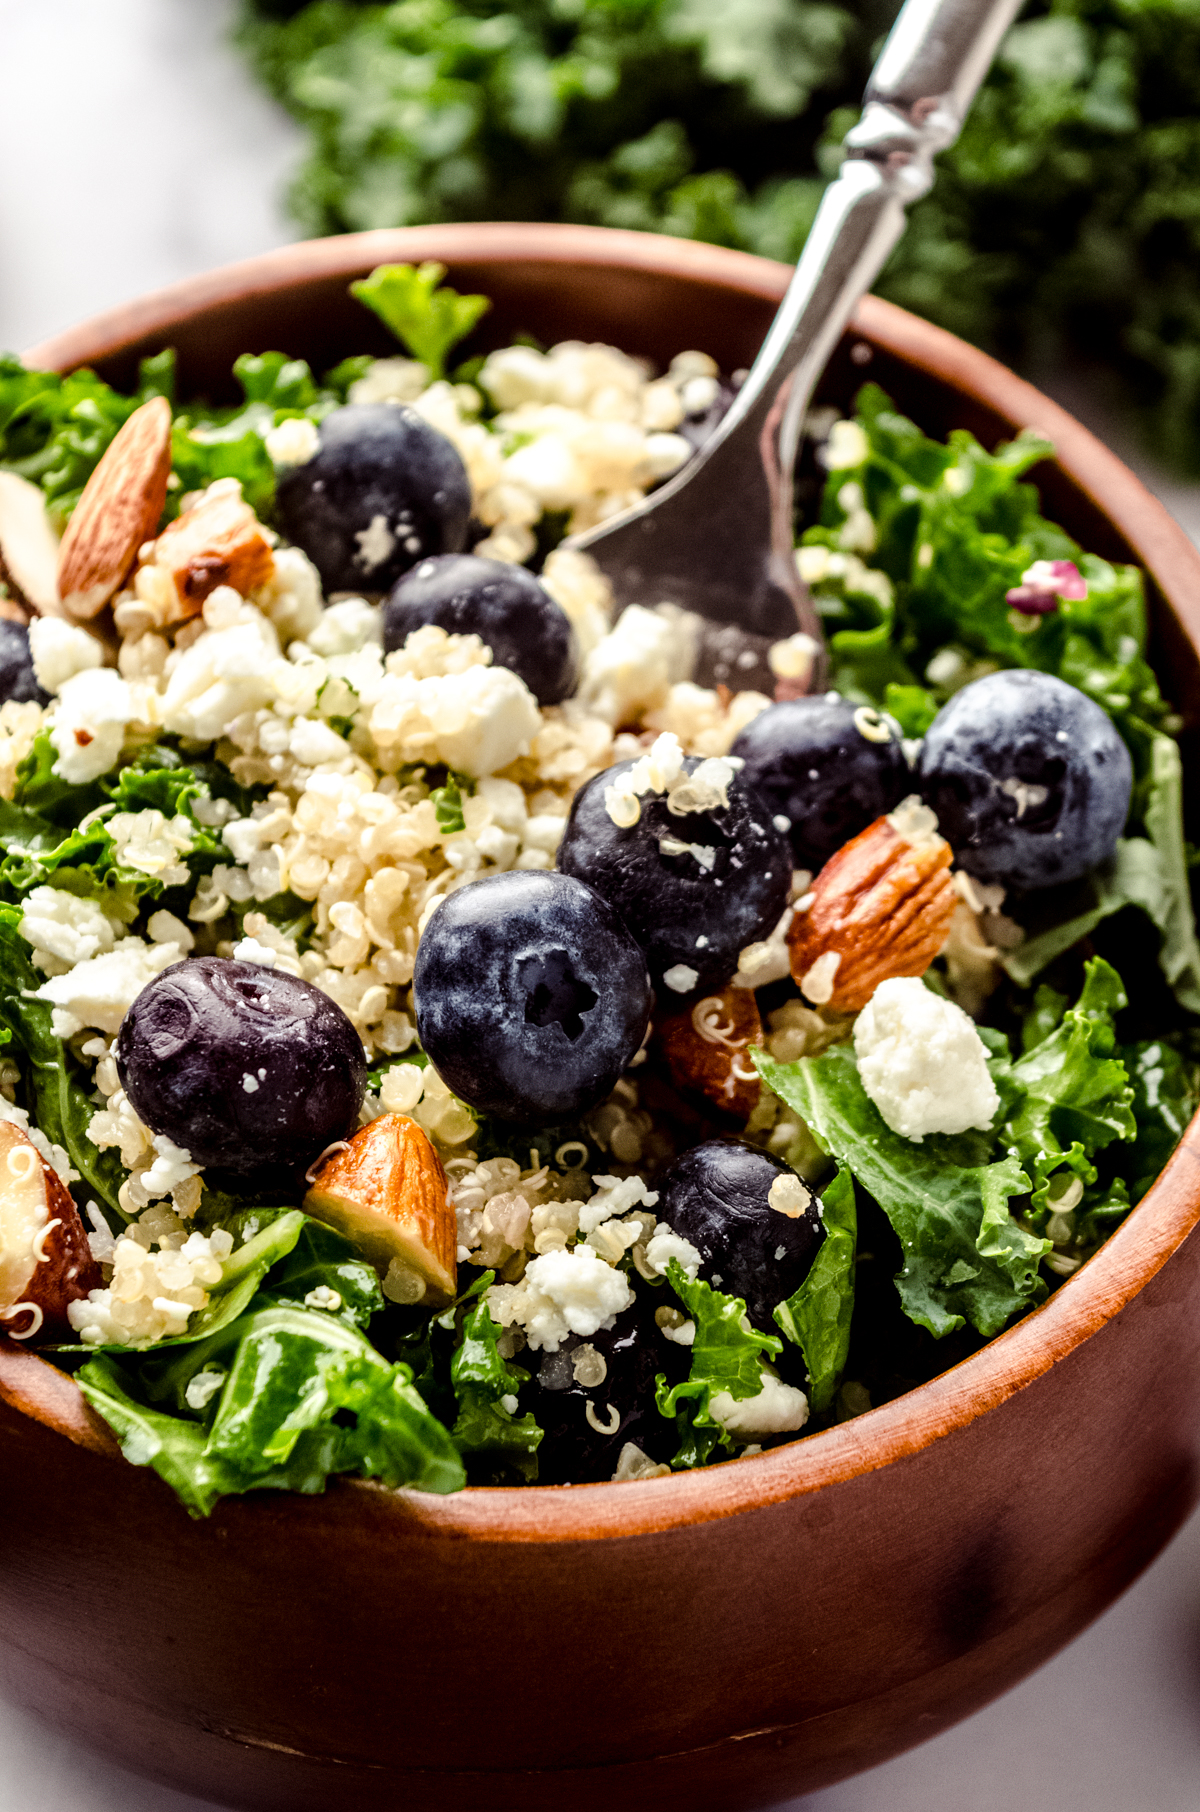 Blueberry quinoa kale salad in a small brown wooden bowl.